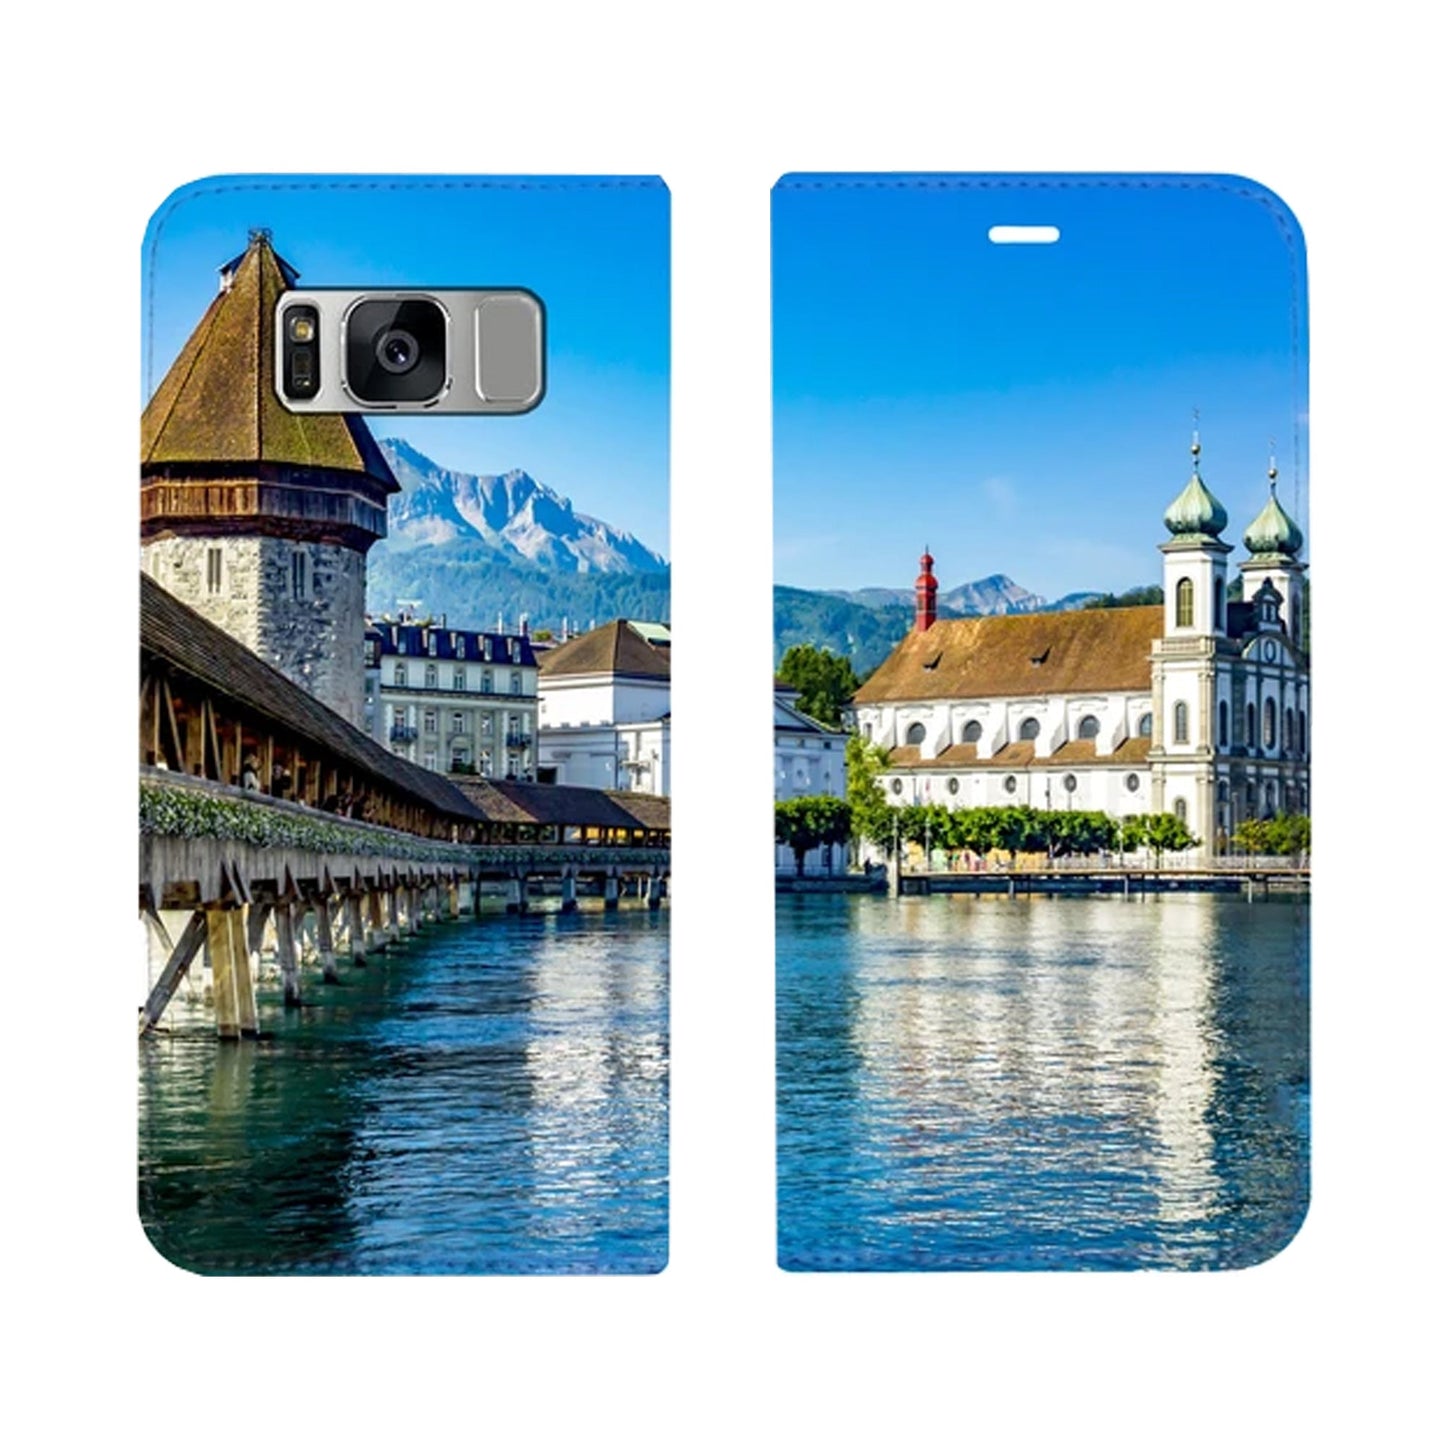 Lucerne City Panorama Case for Samsung Galaxy S8